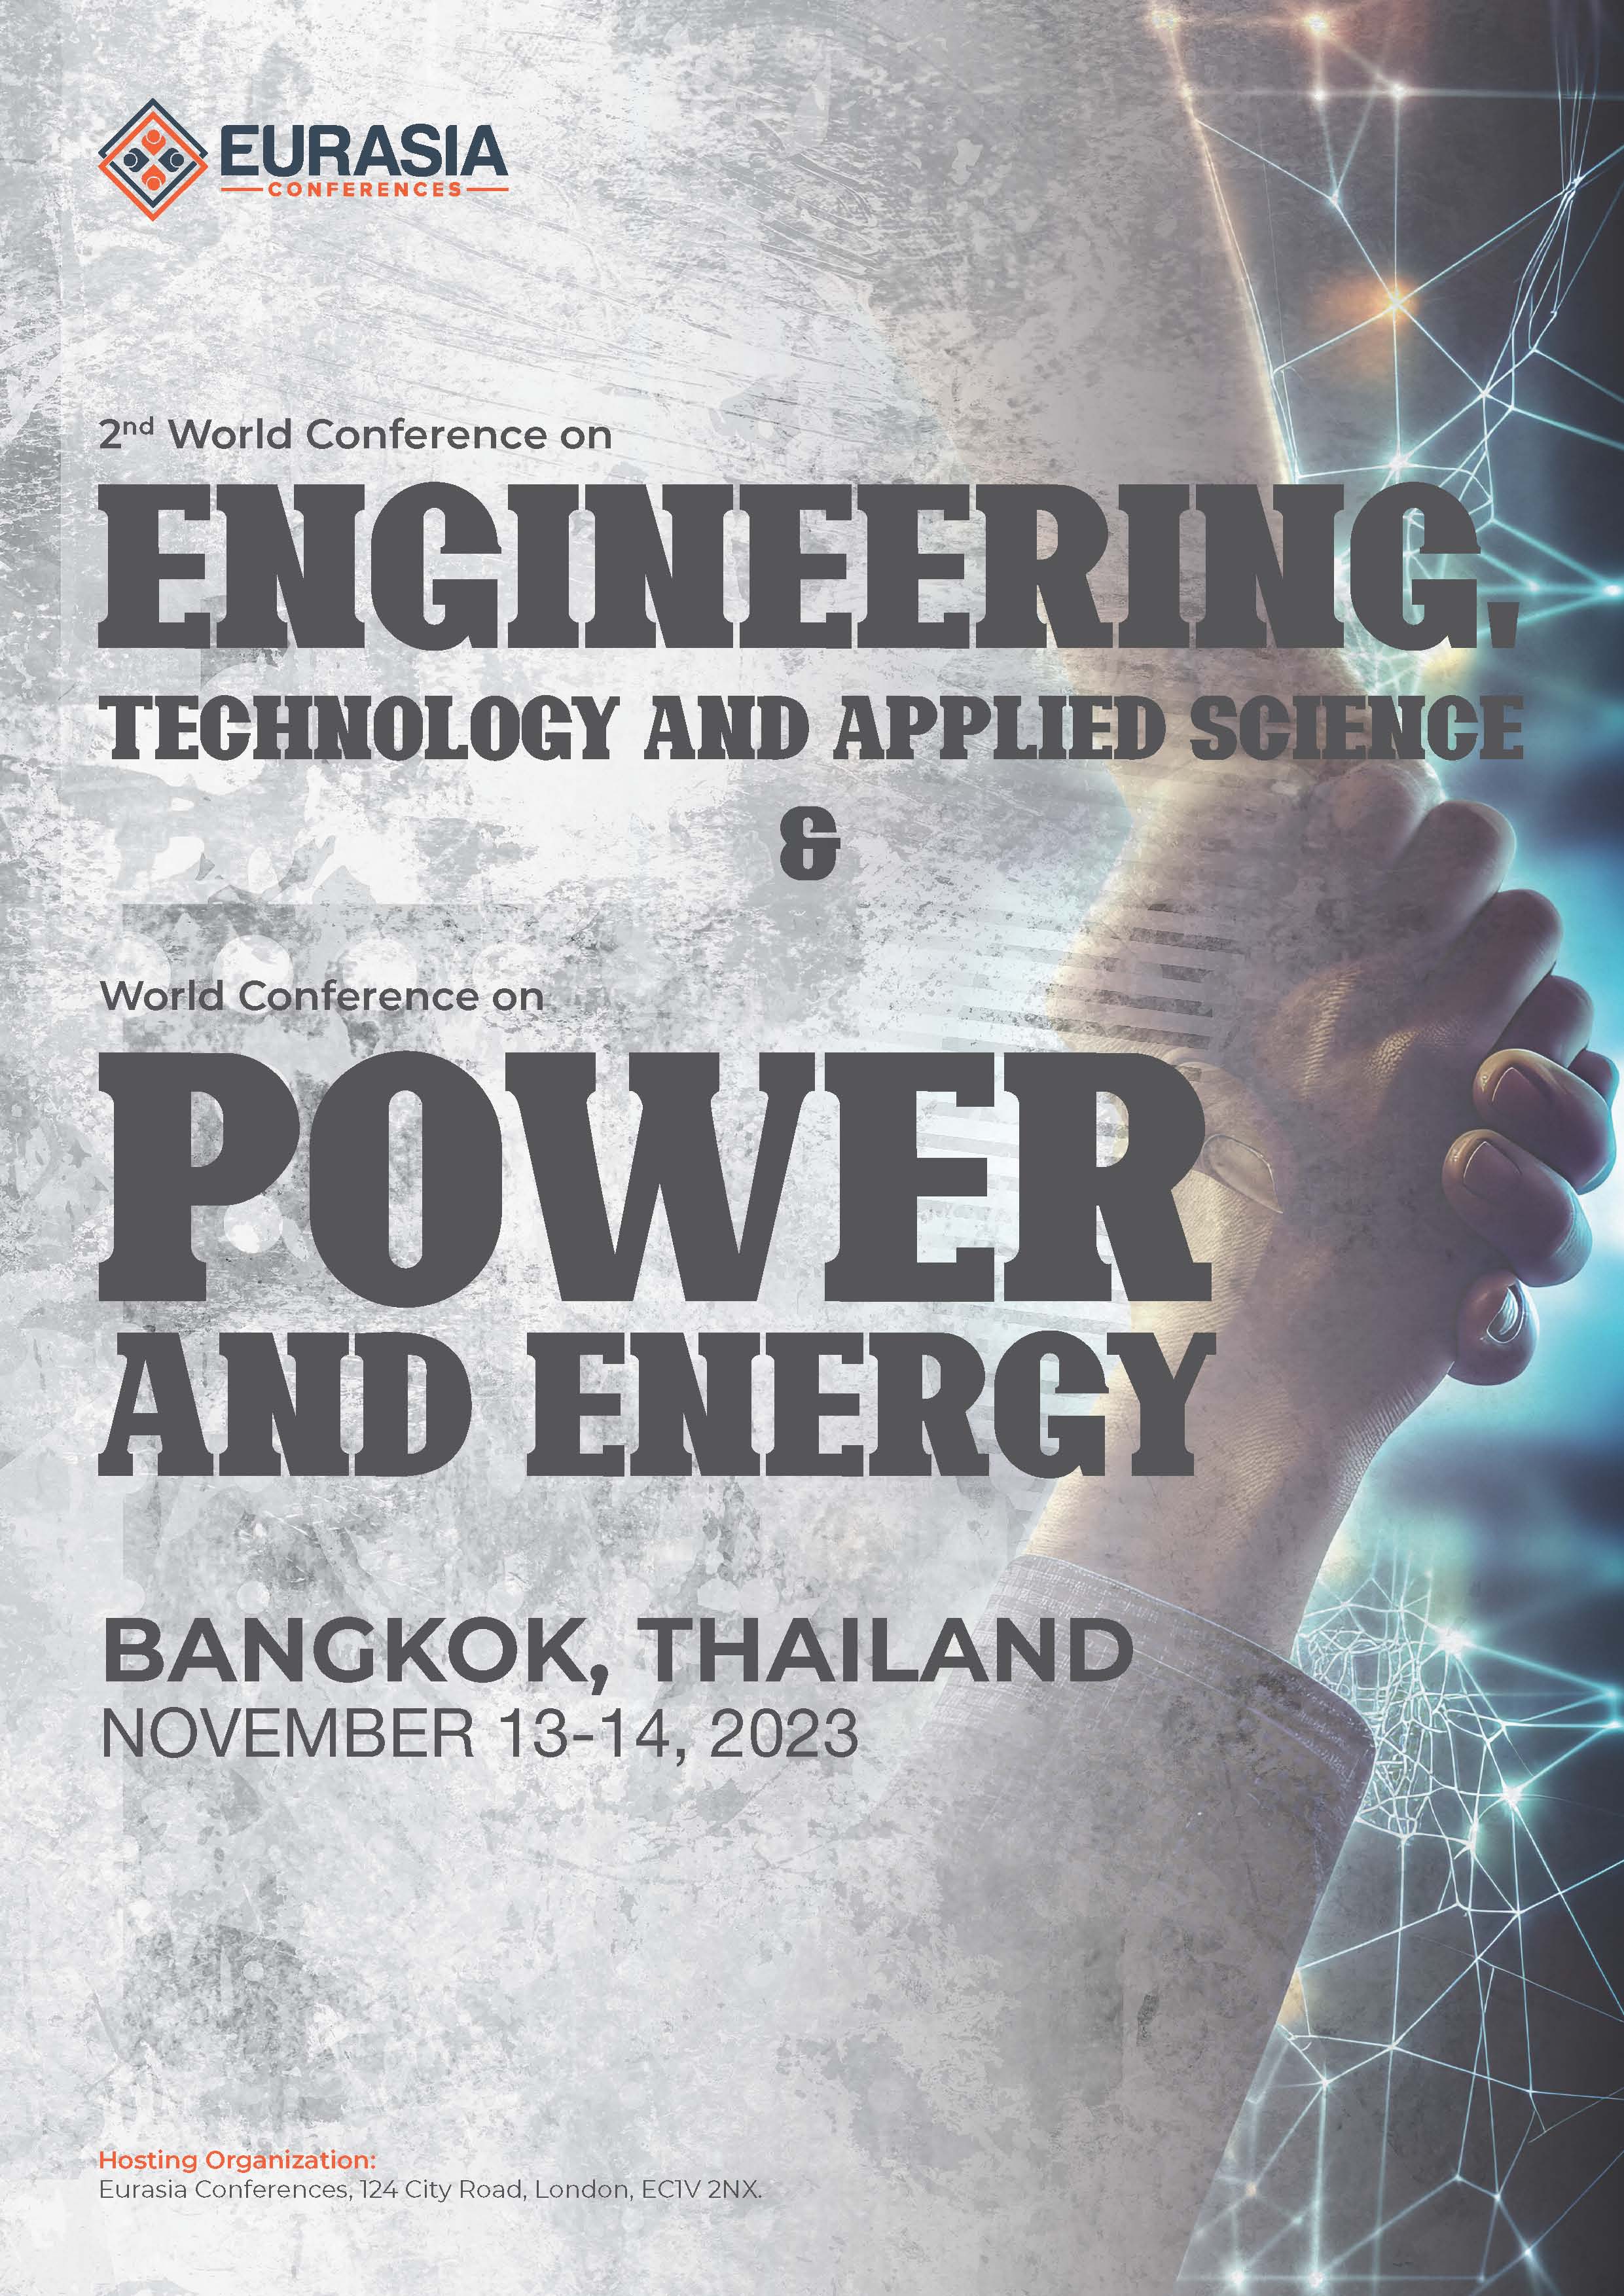 Abstracts of the 2nd World Conference on Engineering, Technology and Applied Science & World Conference on Power and Energy